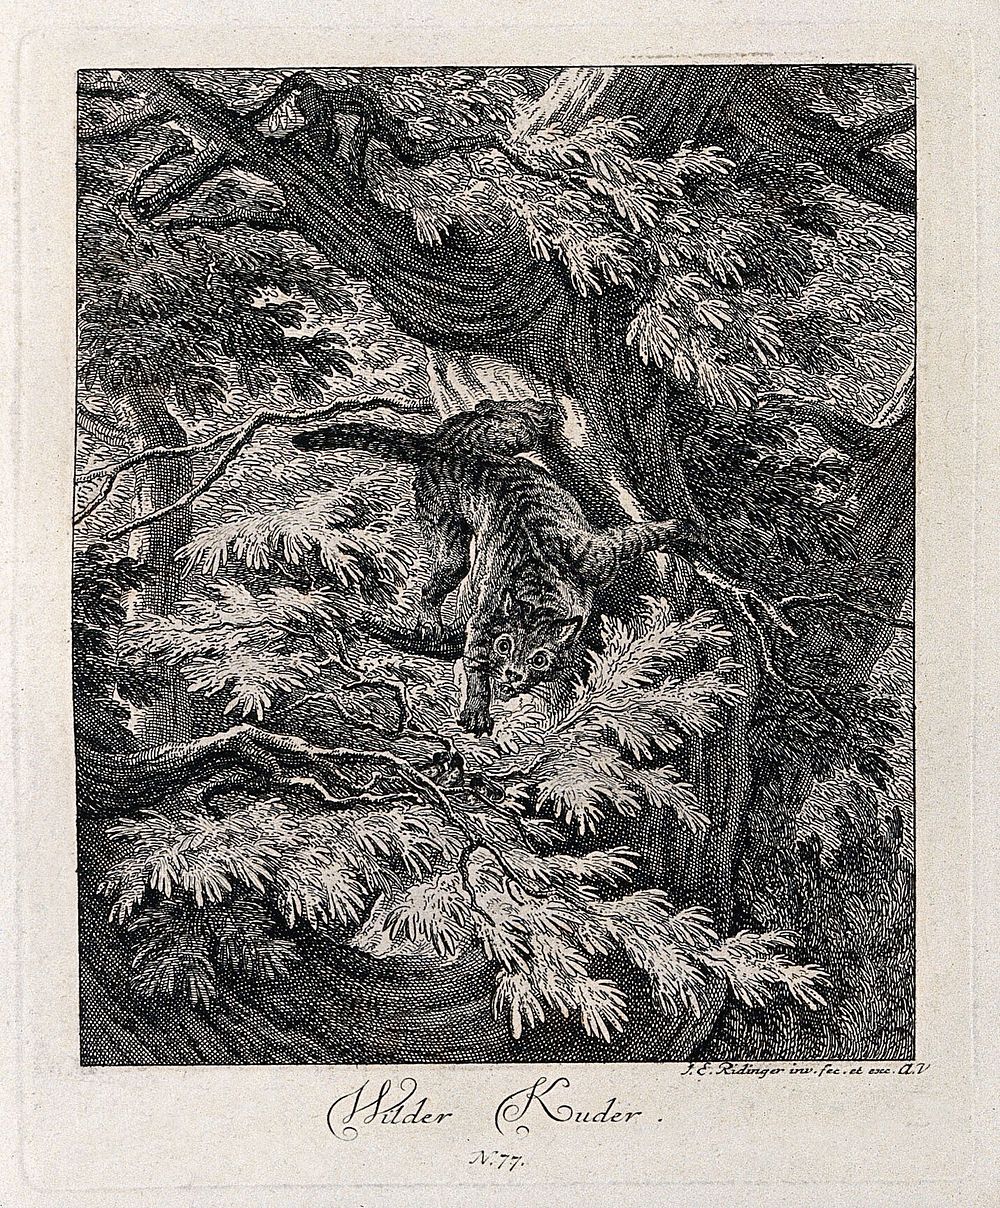 A wild cat climbing down a tree in a forest. Etching by J. E. Ridinger.